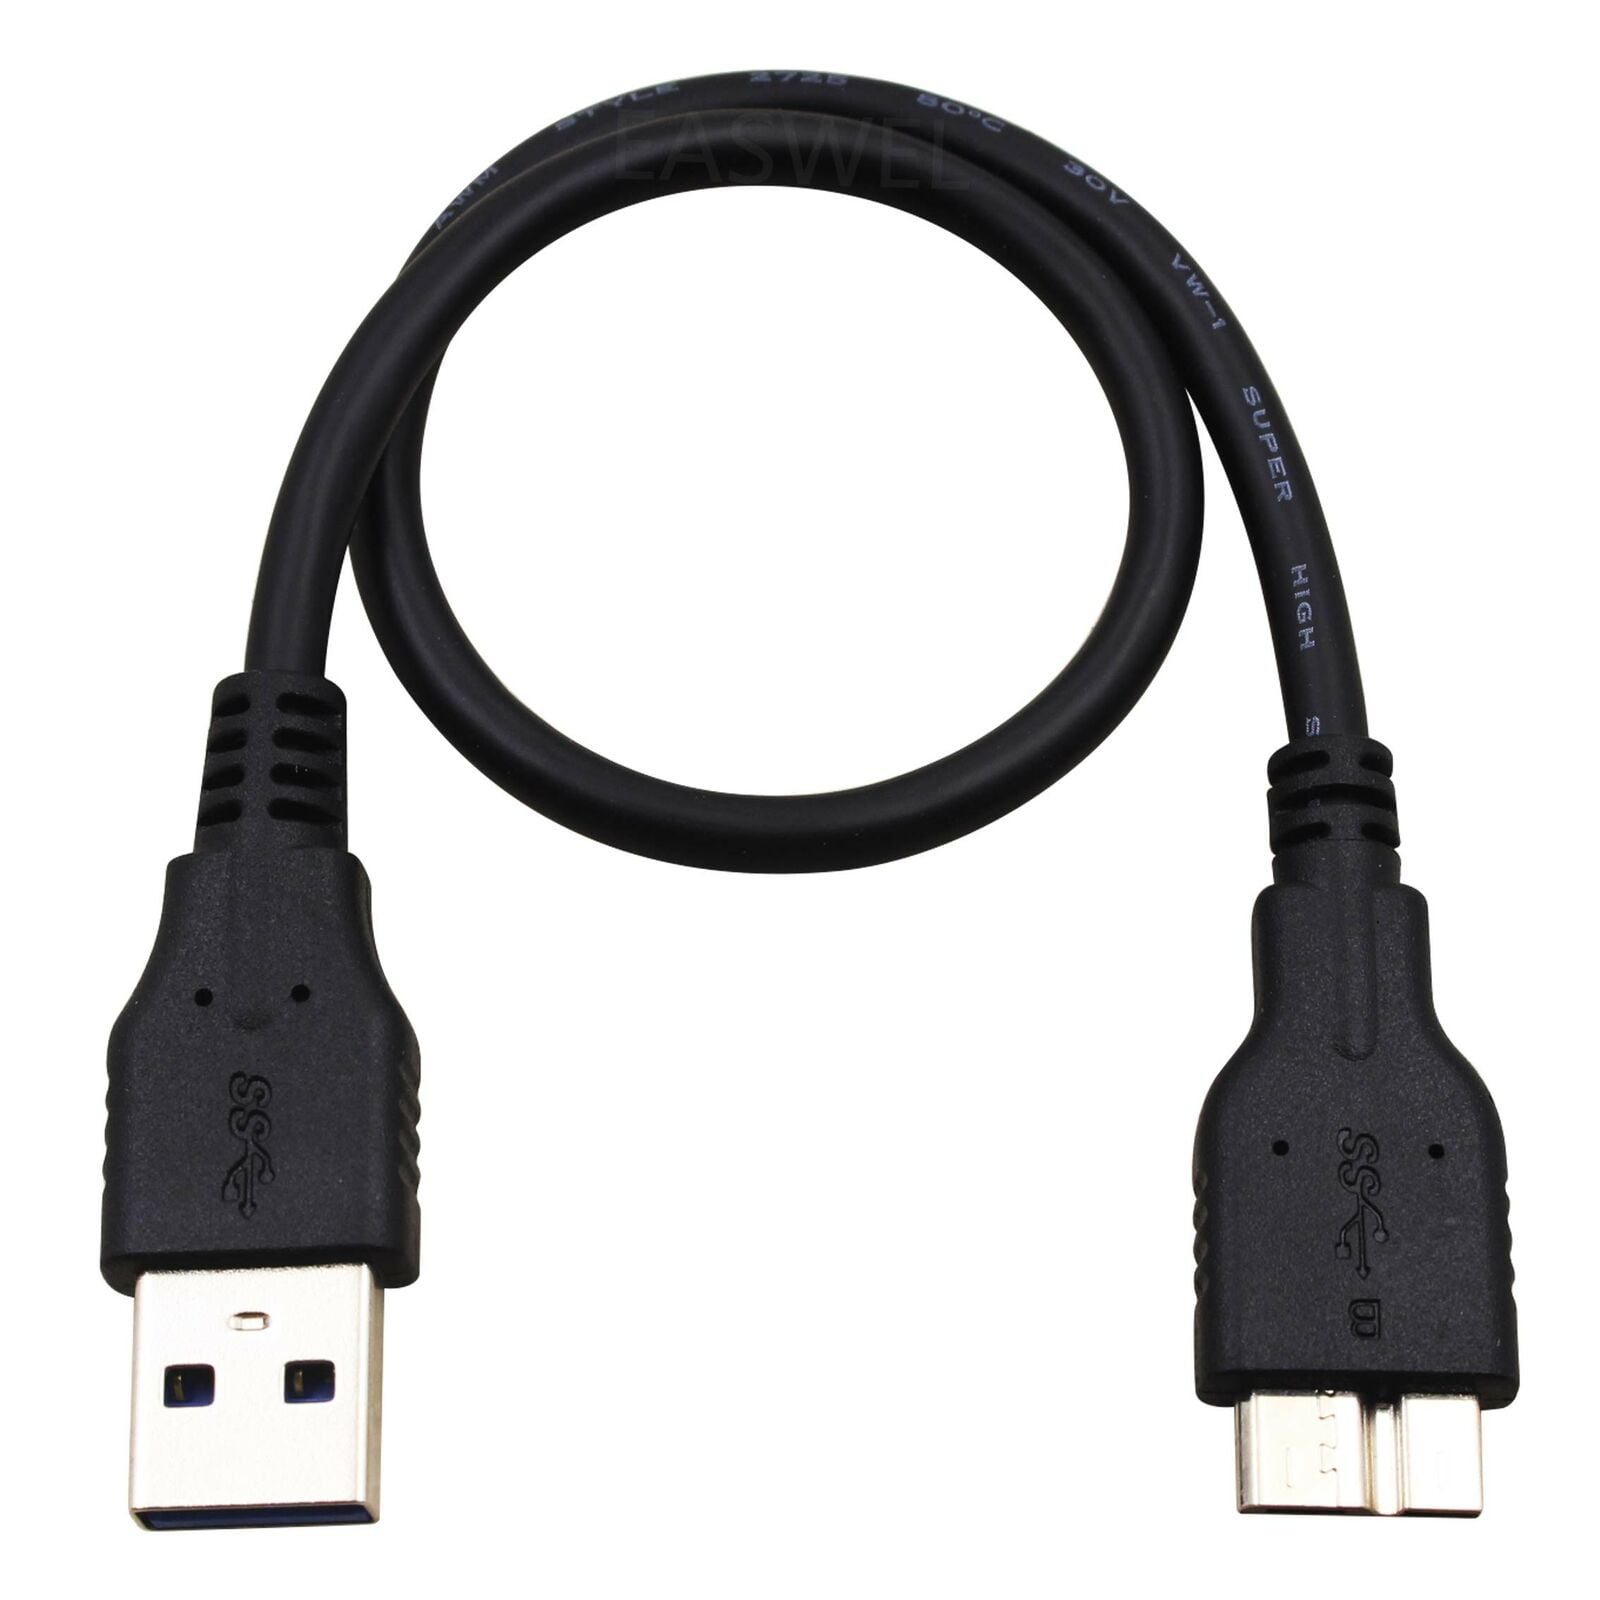 seagate usb cable - seagate cable replacement